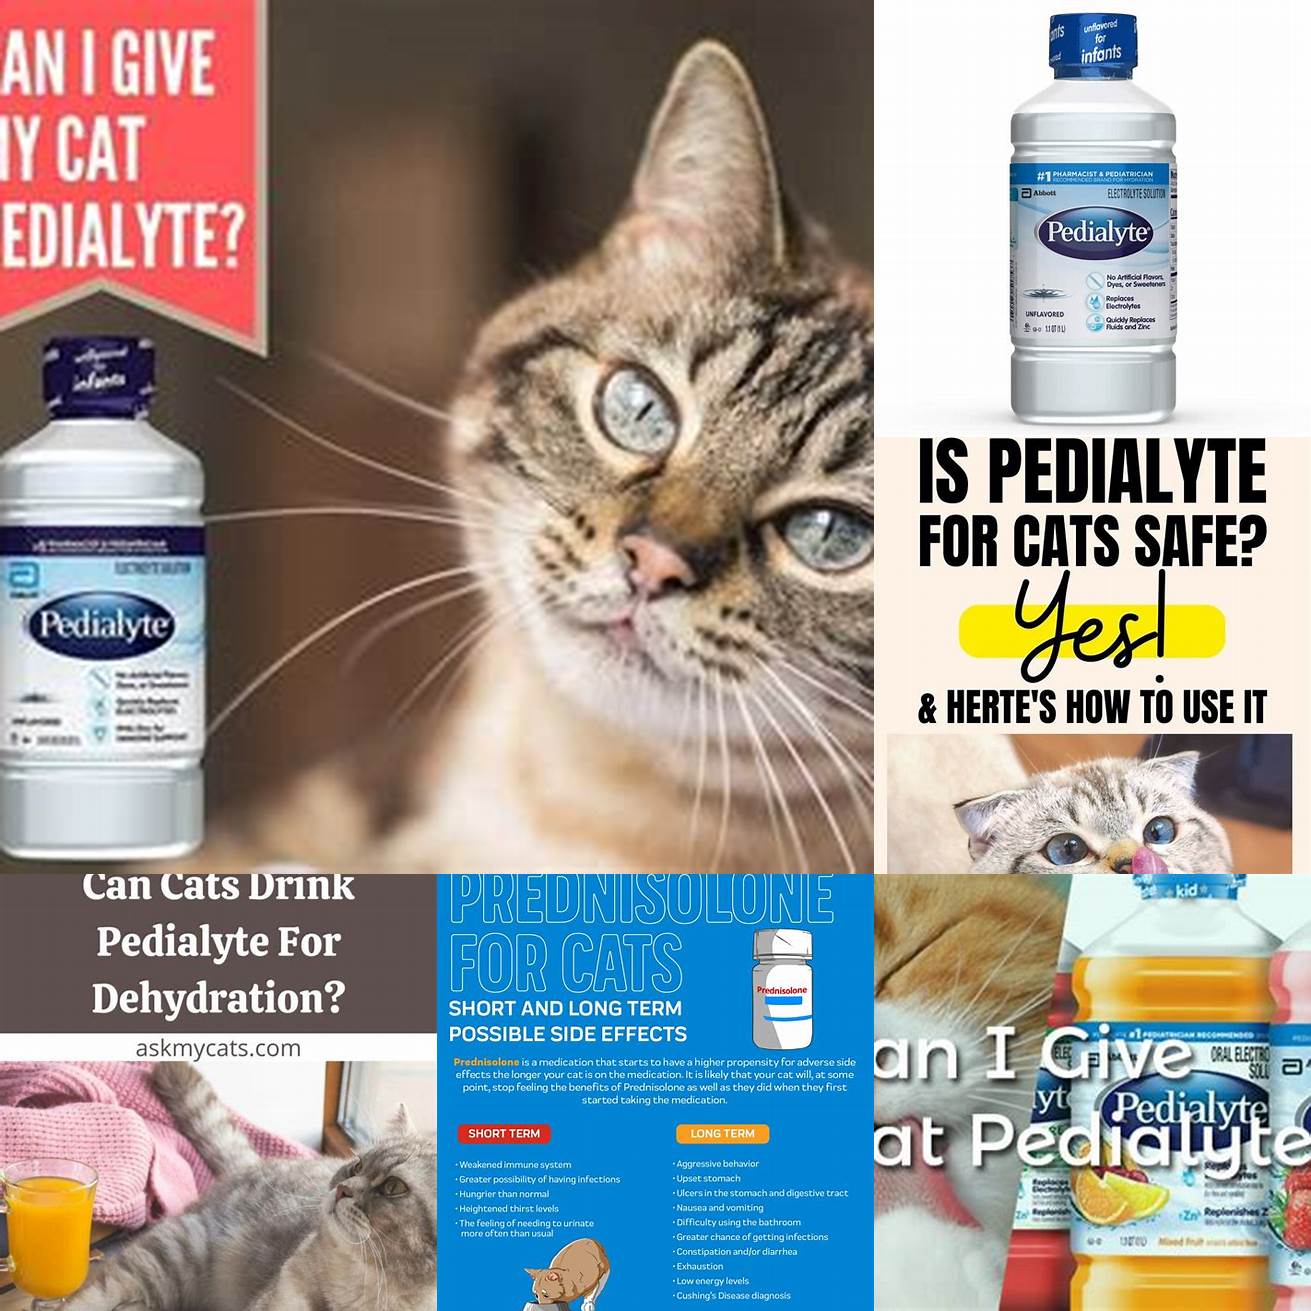 Q What are the side effects of Pedialyte in cats